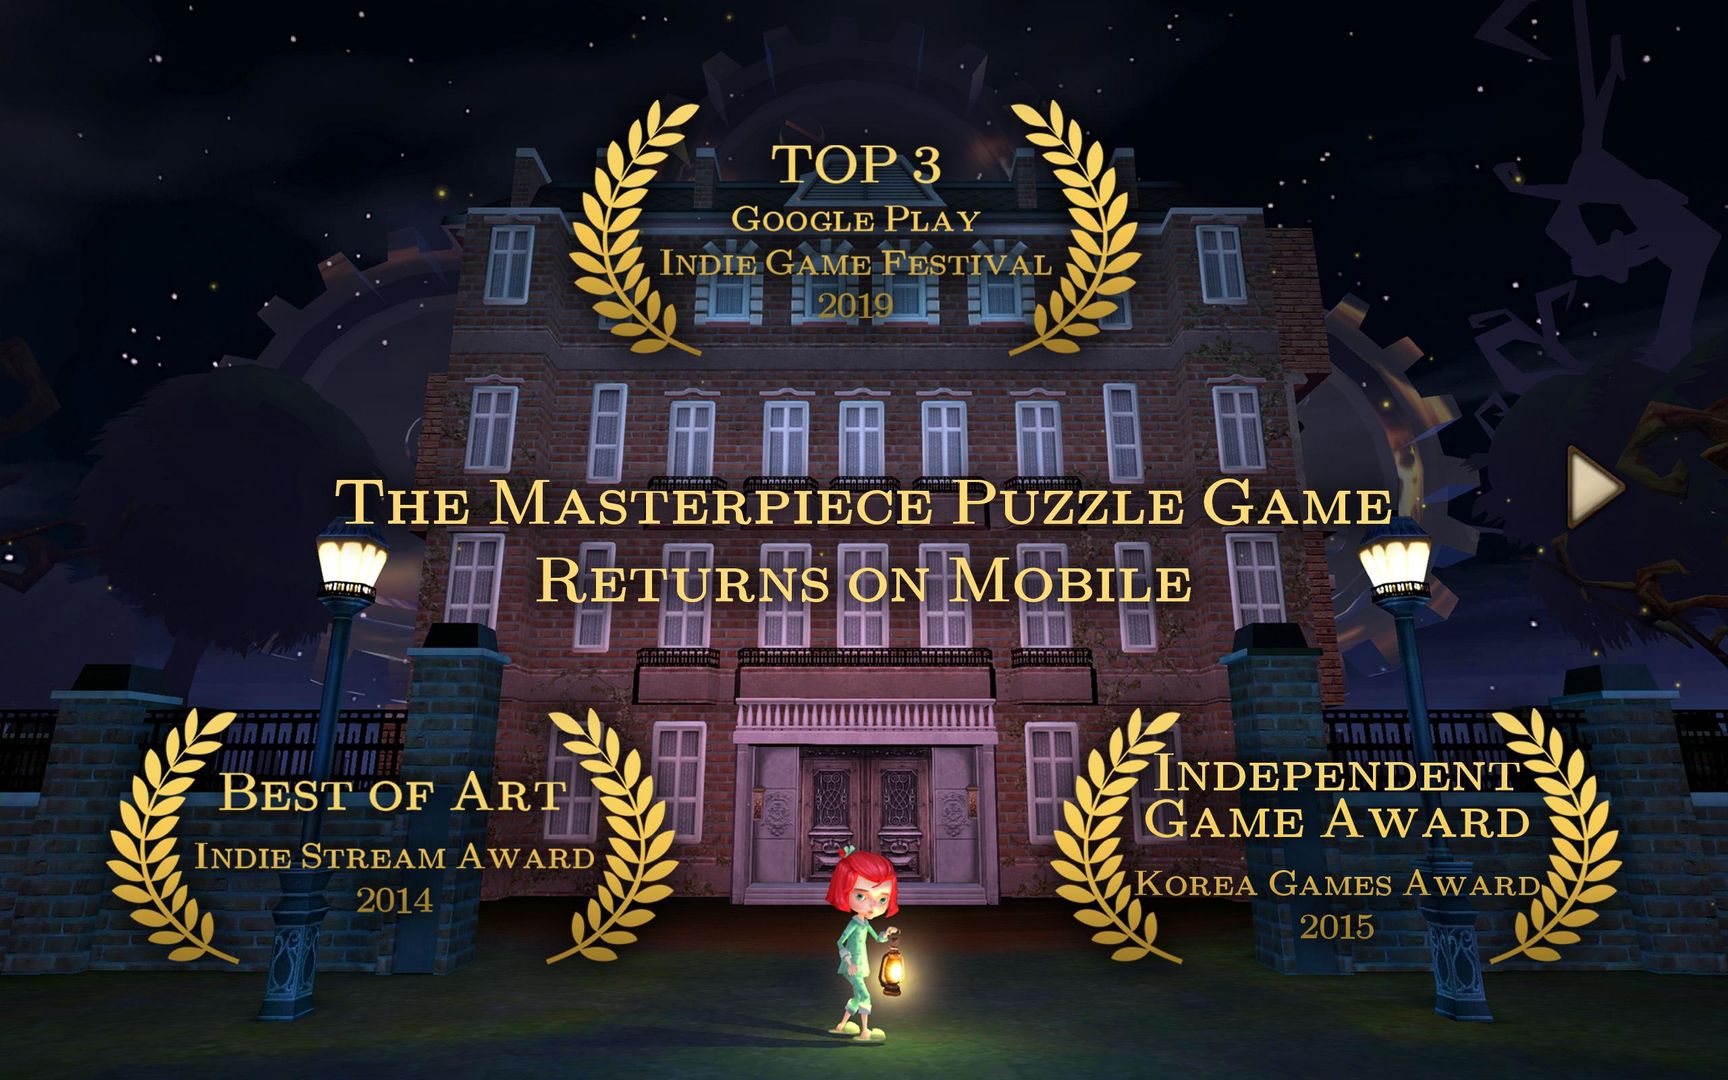 Screenshot of ROOMS: The Toymaker's Mansion